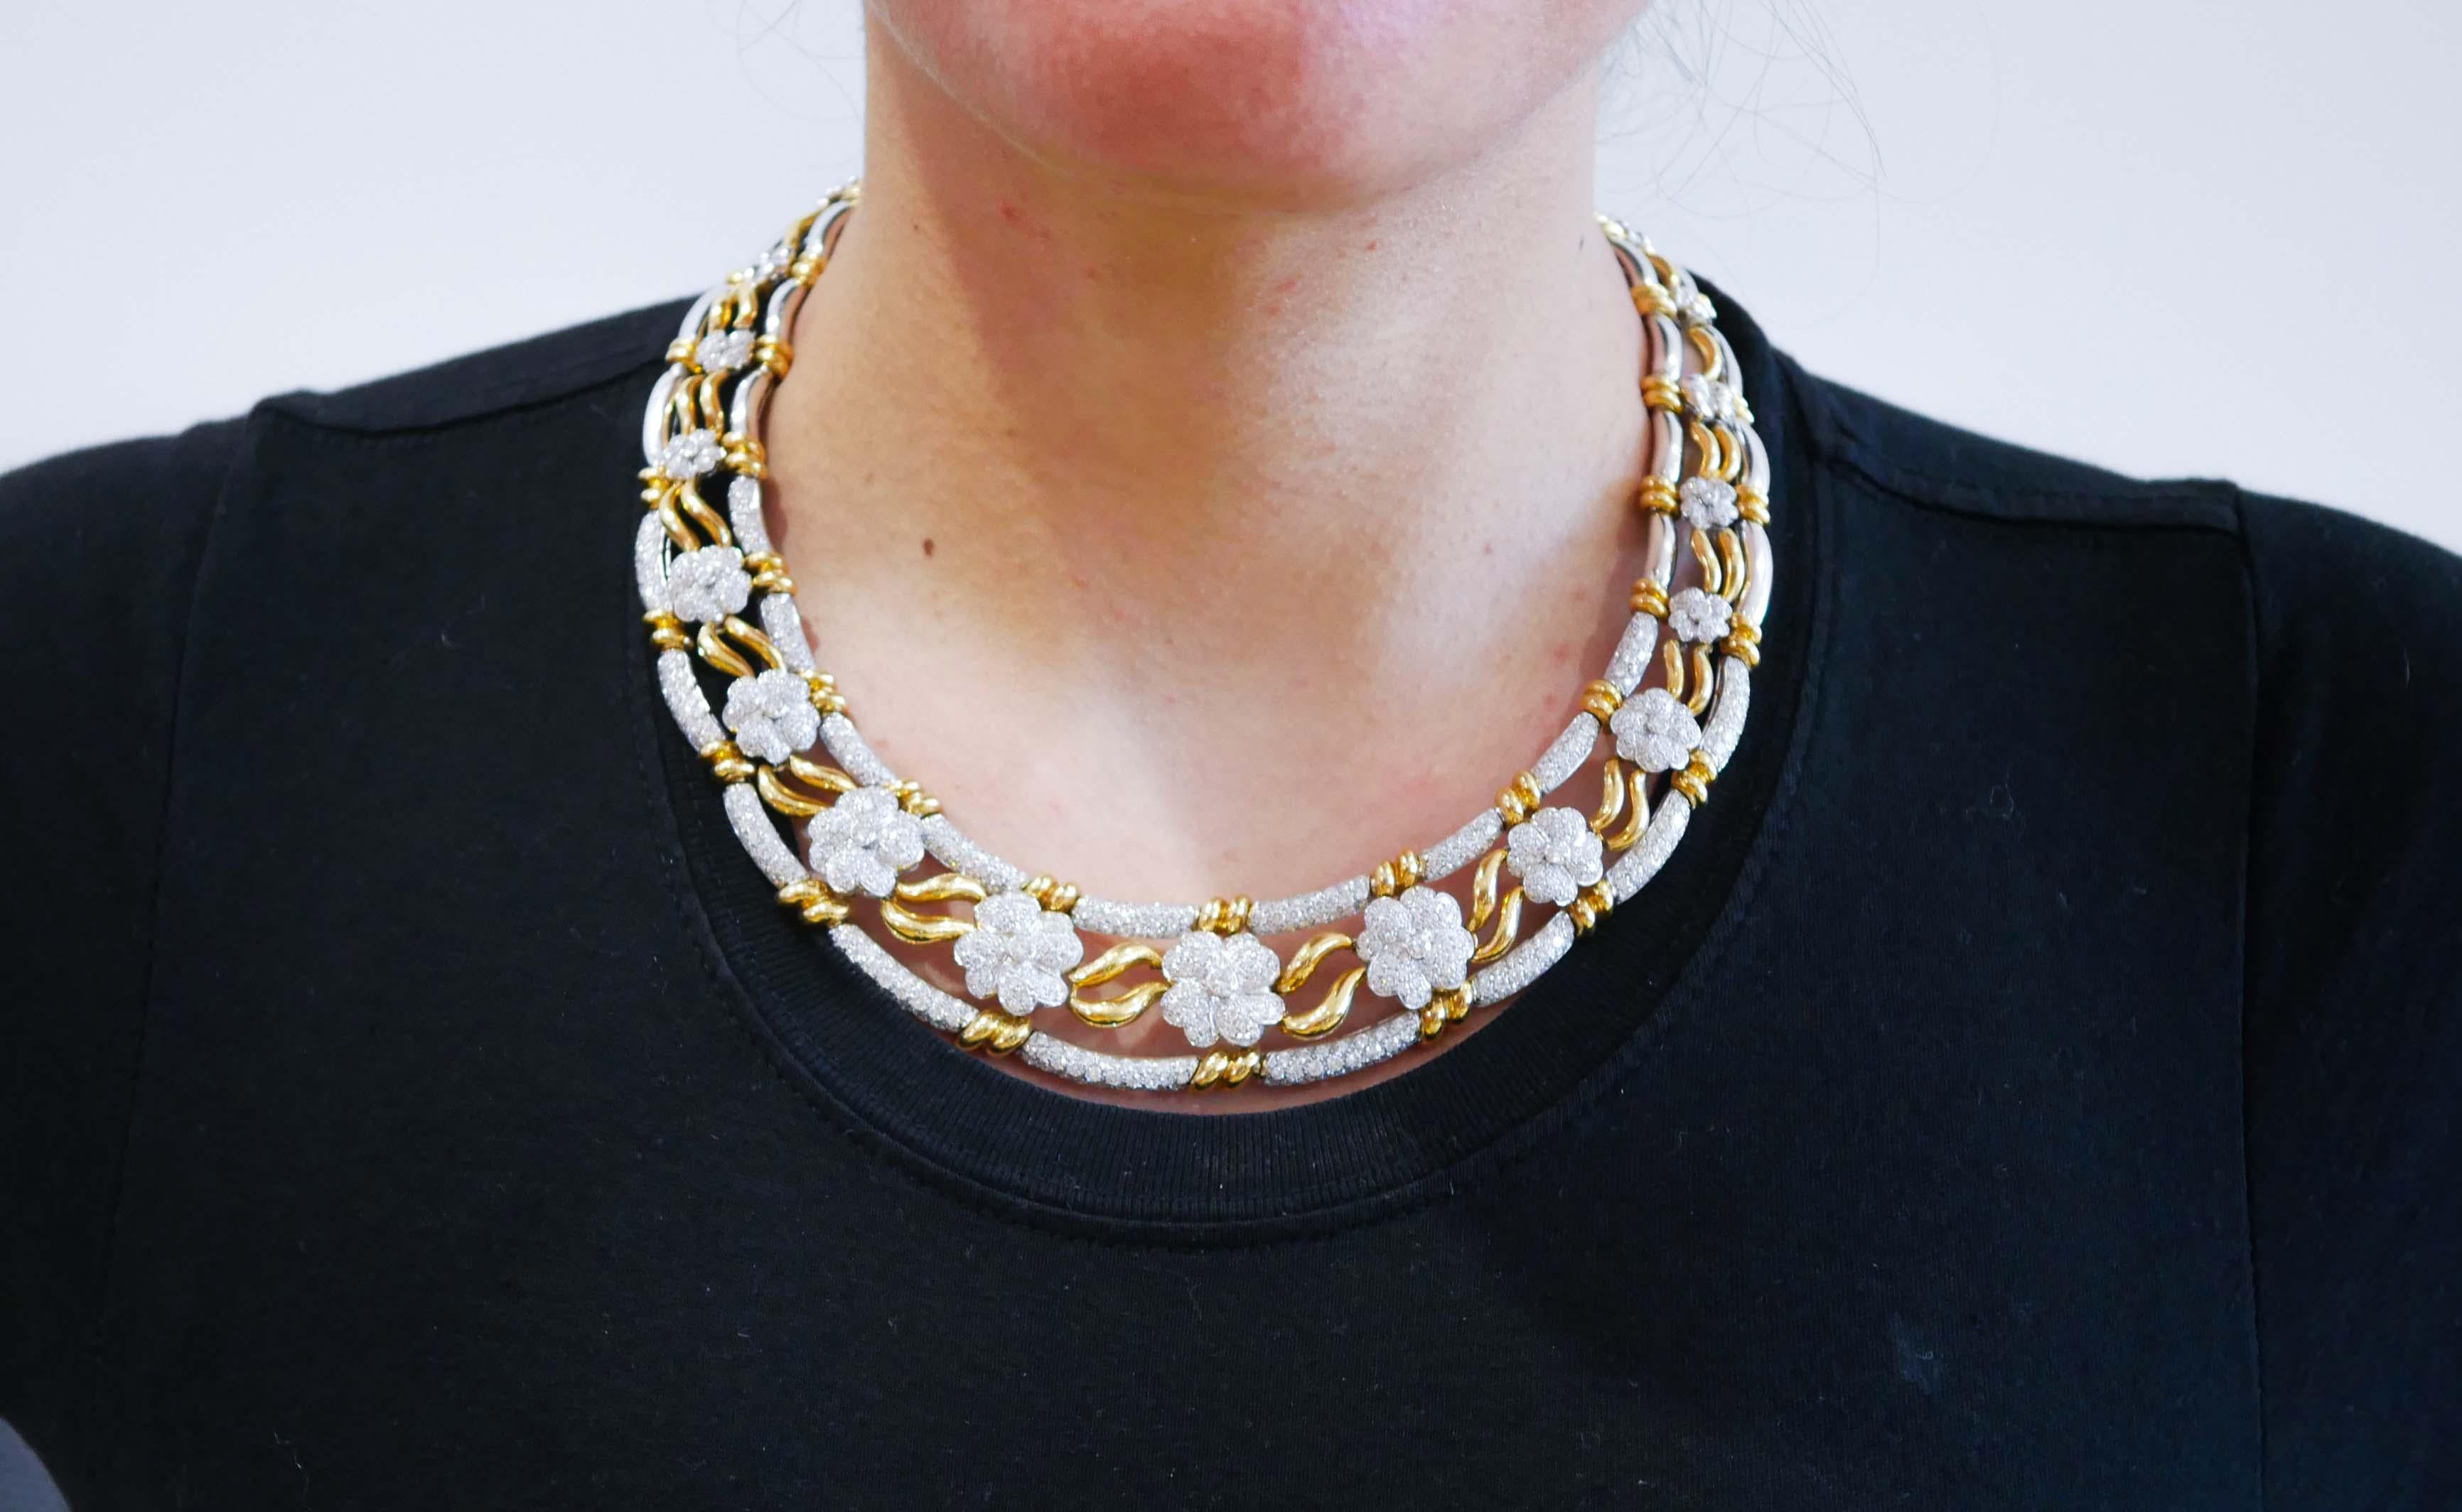 Brilliant Cut Diamonds, 18 Karat Yellow Gold and White Gold Necklace. For Sale